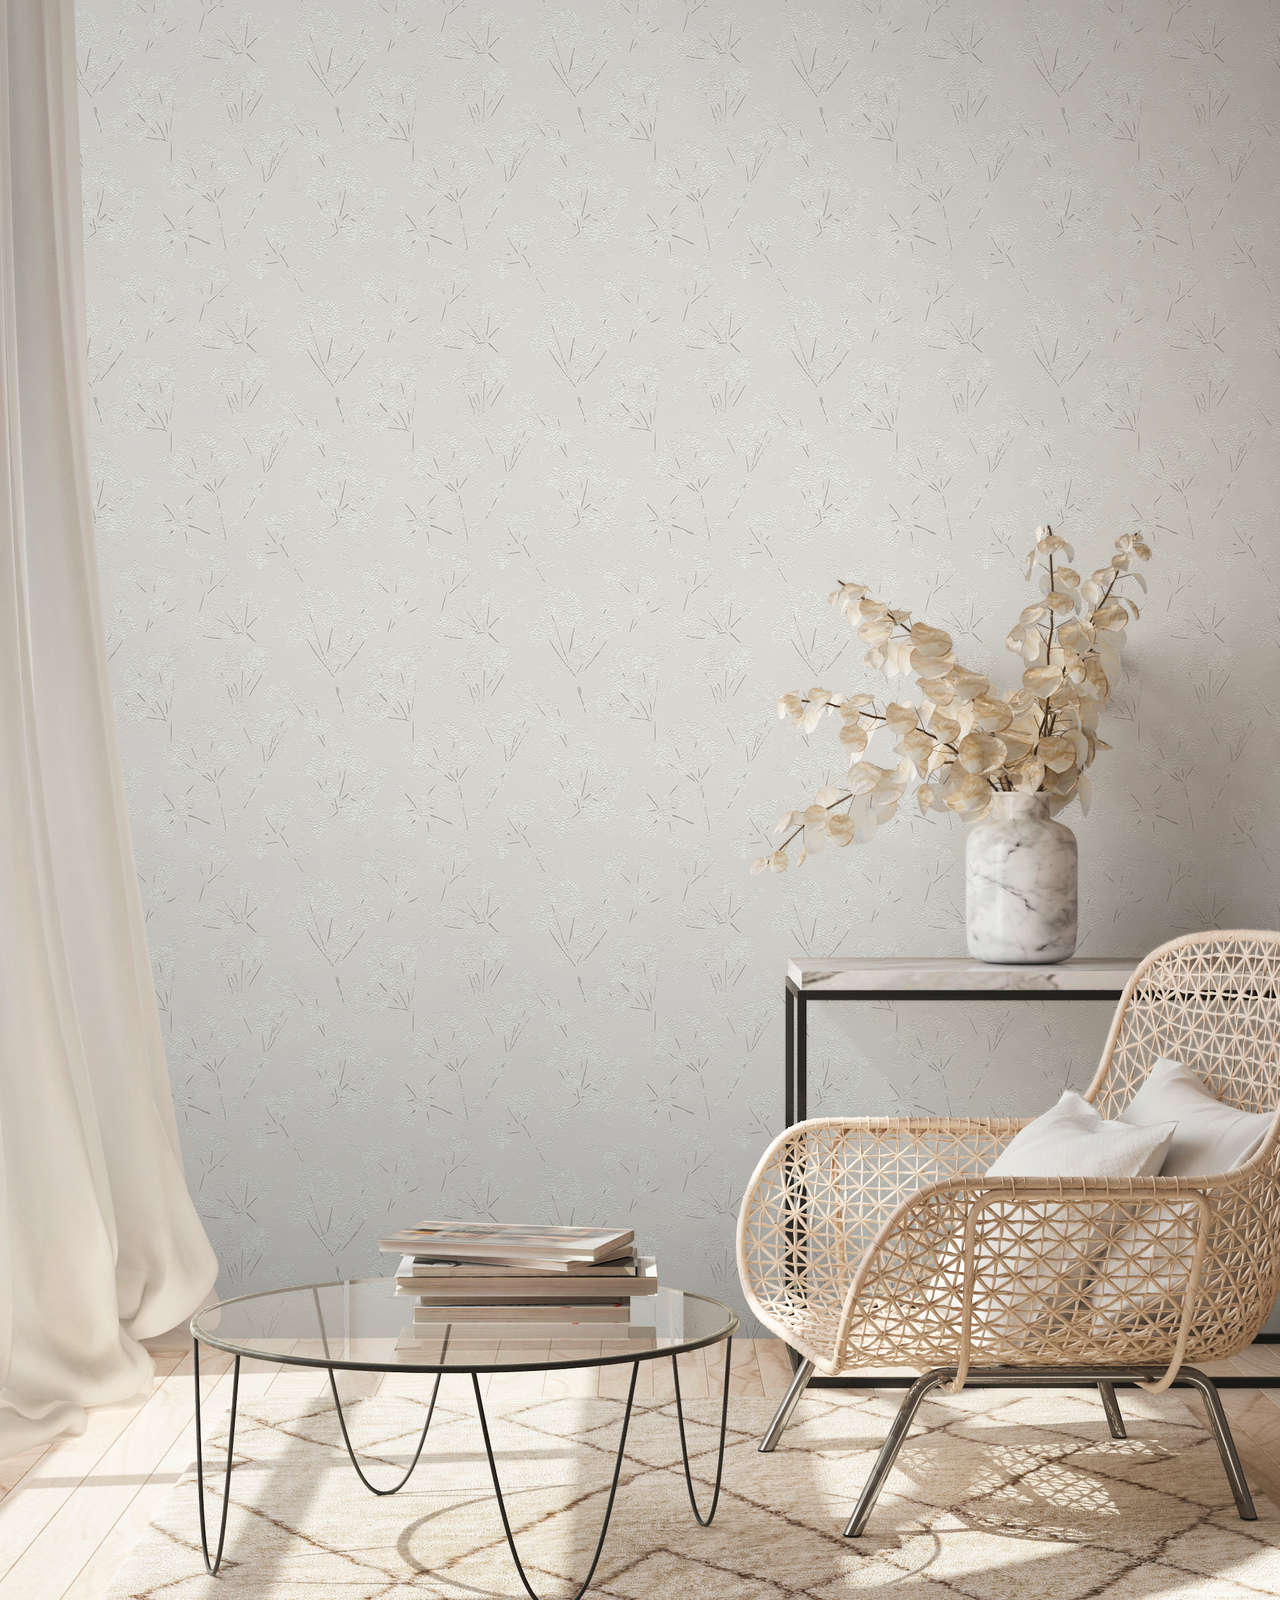             Non-woven wallpaper with abstract floral pattern - grey, white
        